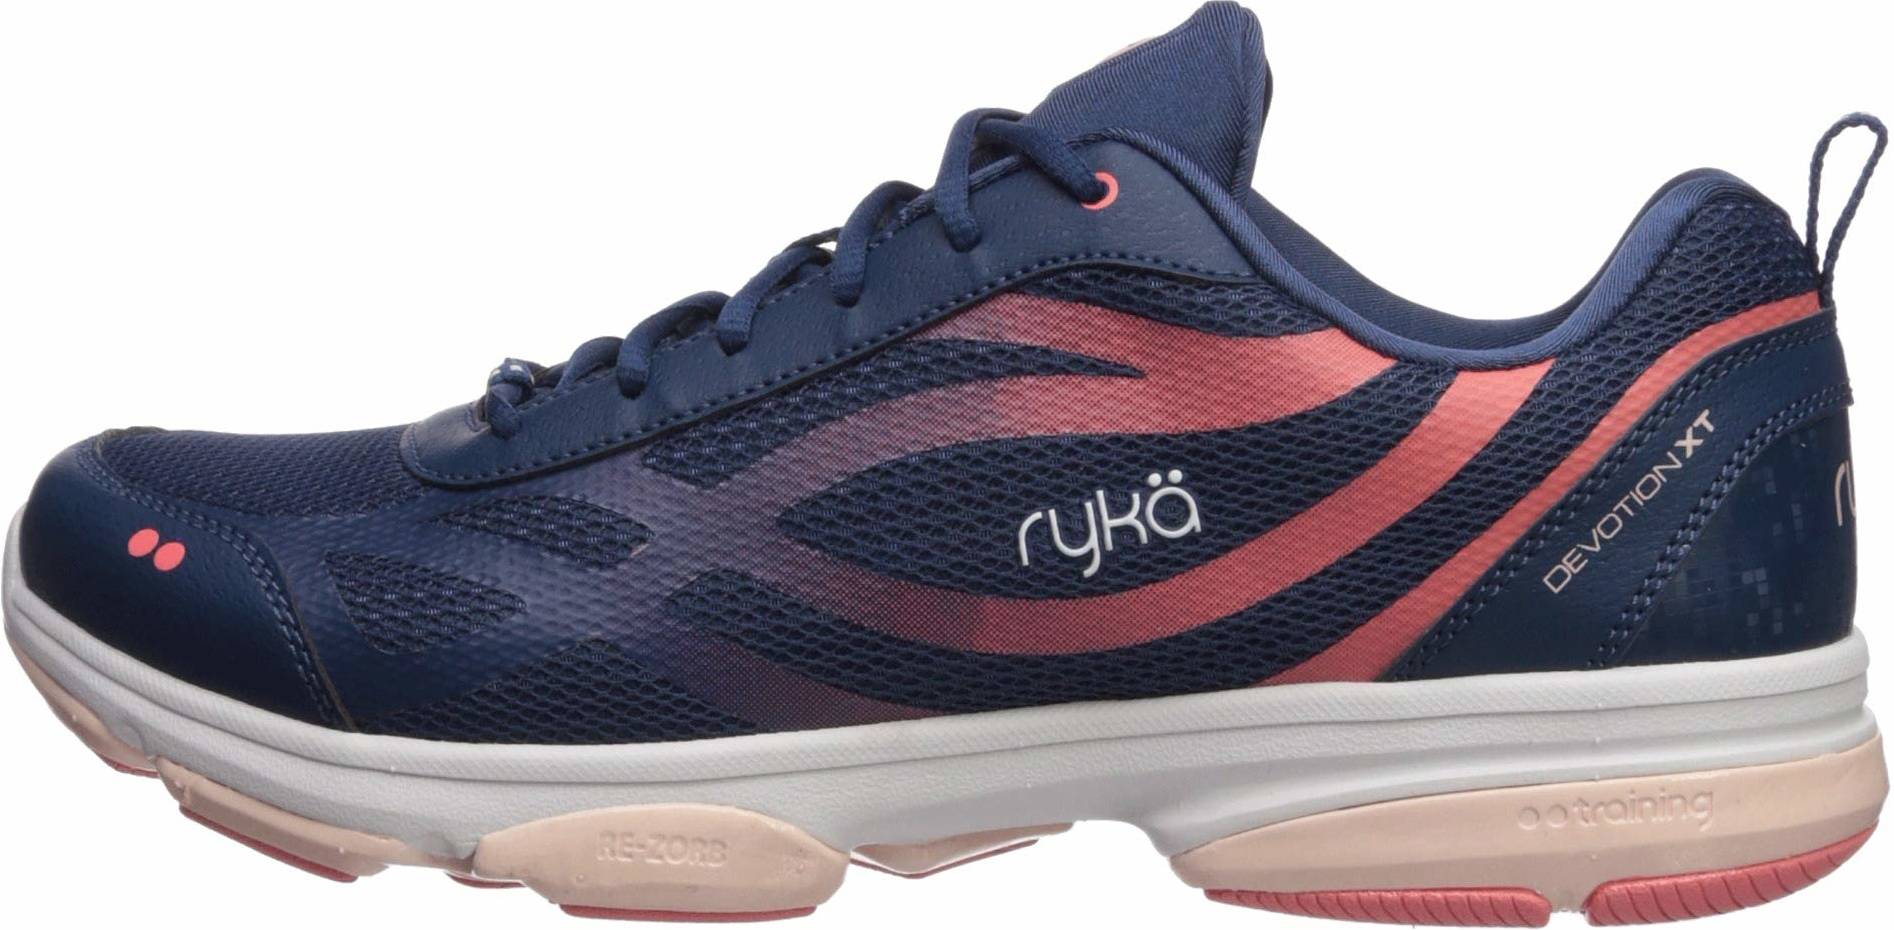 ryka wide shoes